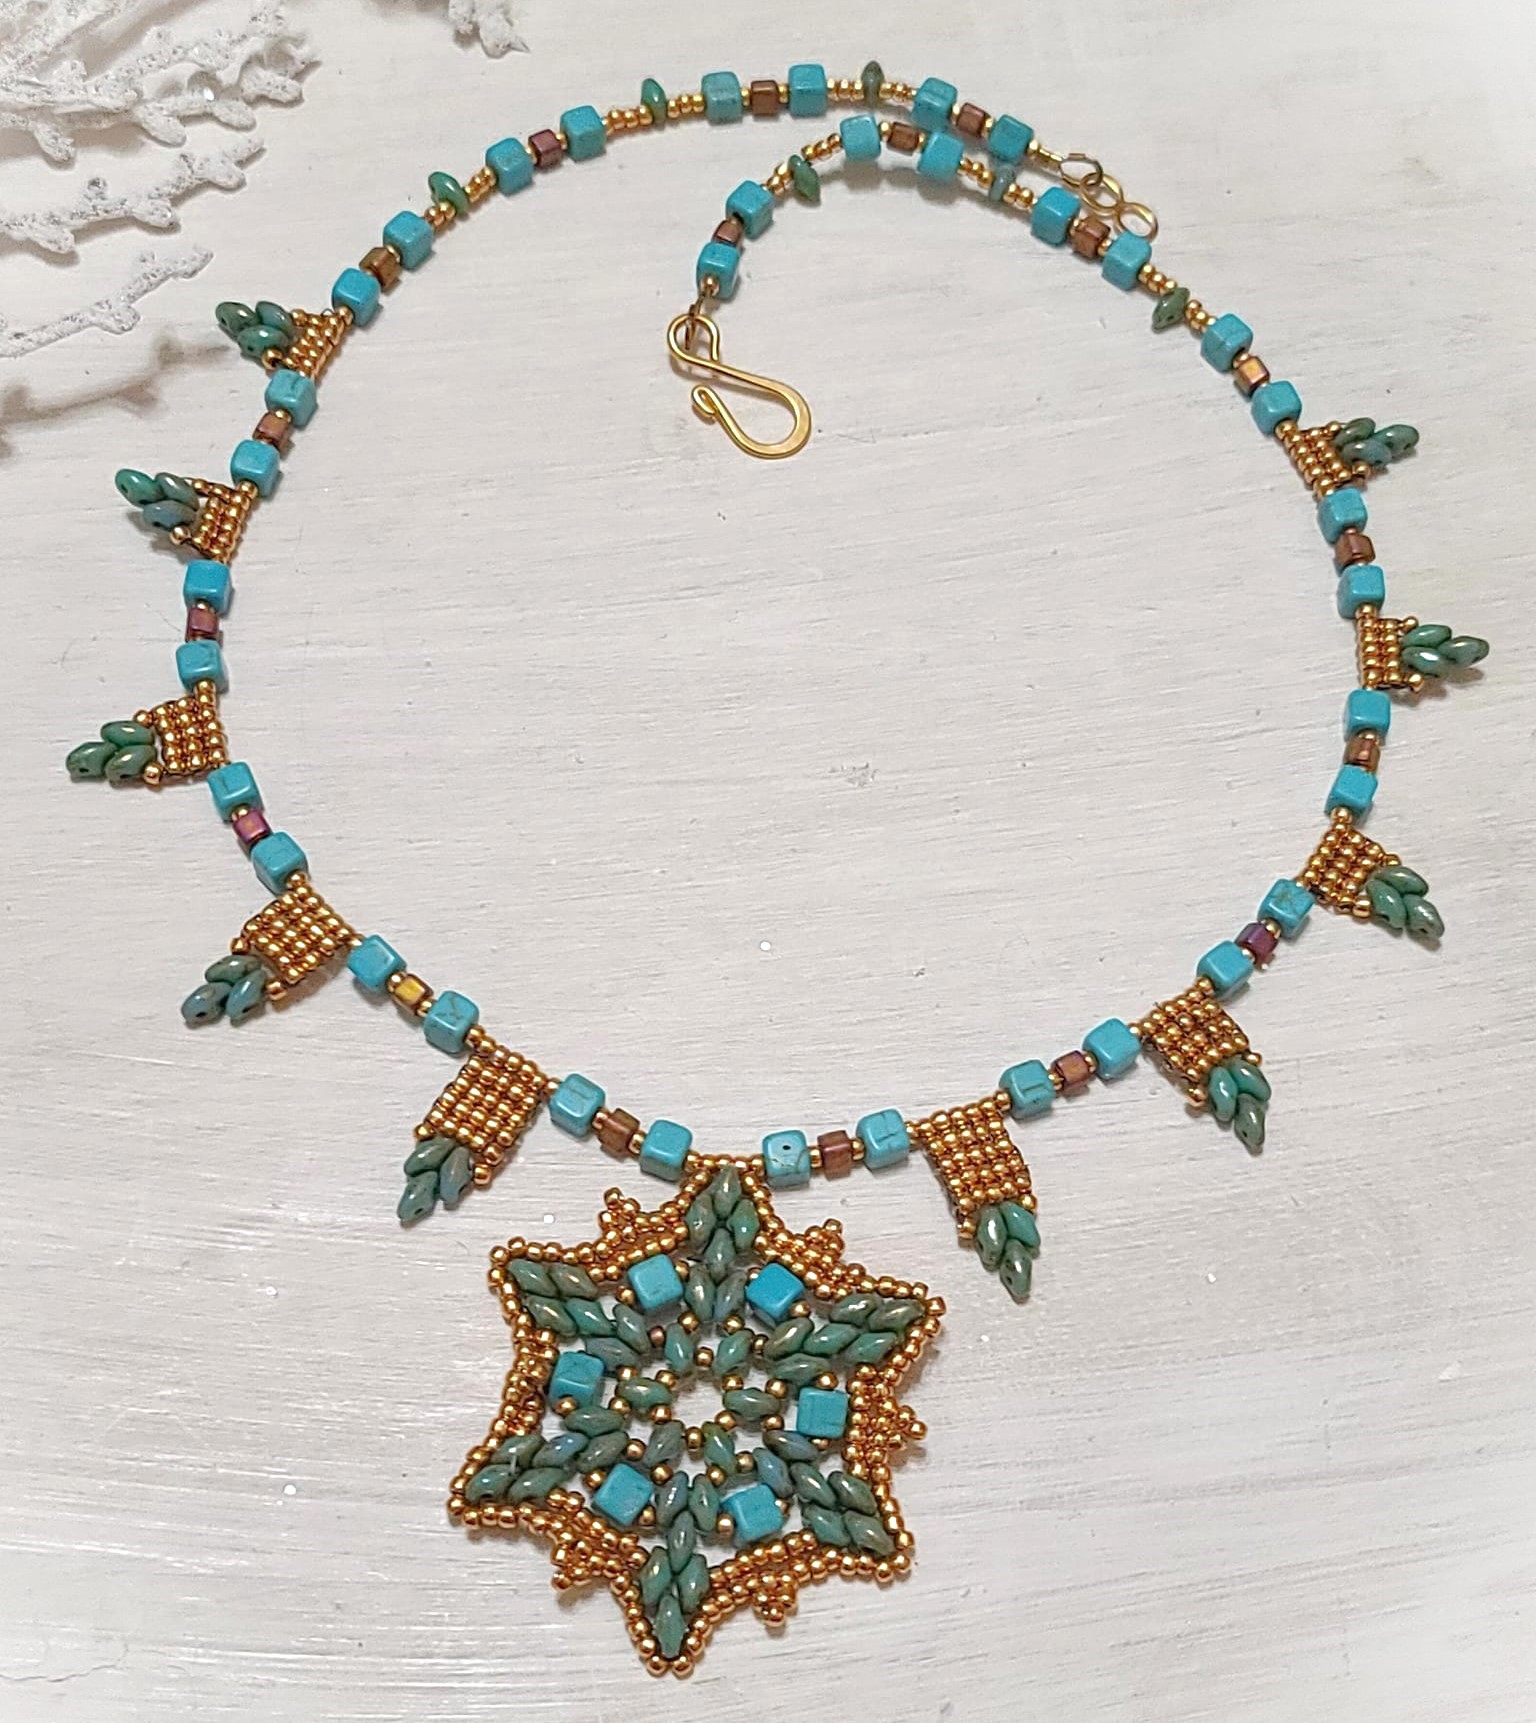 Turquoise howlite gem and superduo glass beaded necklace